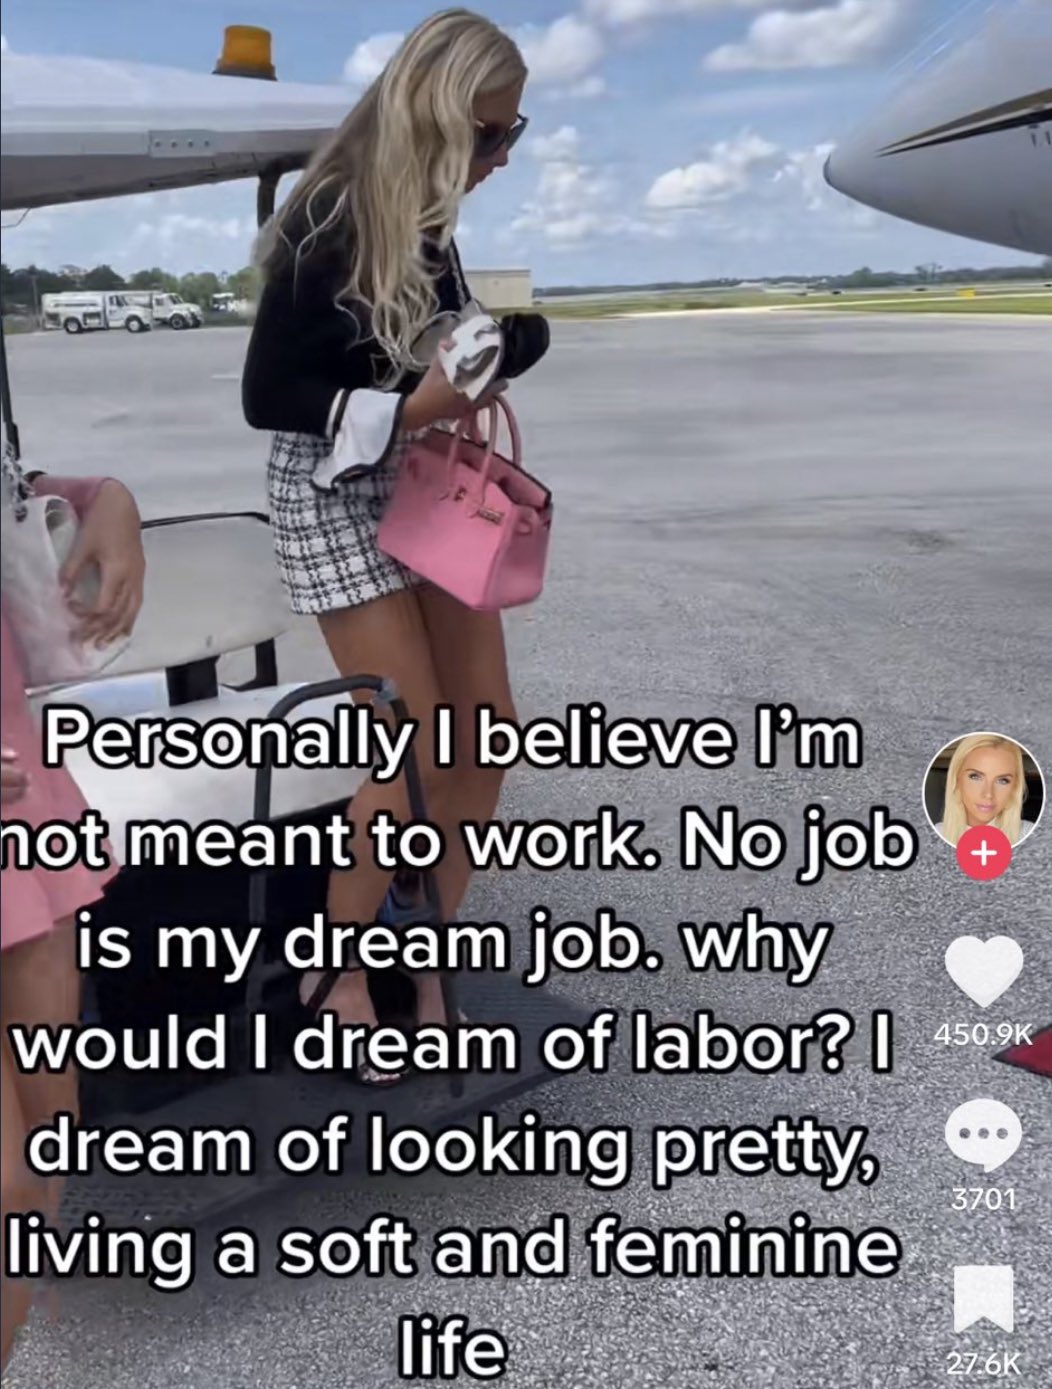 wild tiktok screenshots - vacation - Personally I believe I'm not meant to work. No job is my dream job. why would I dream of labor? I dream of looking pretty, living a soft and feminine life 3701